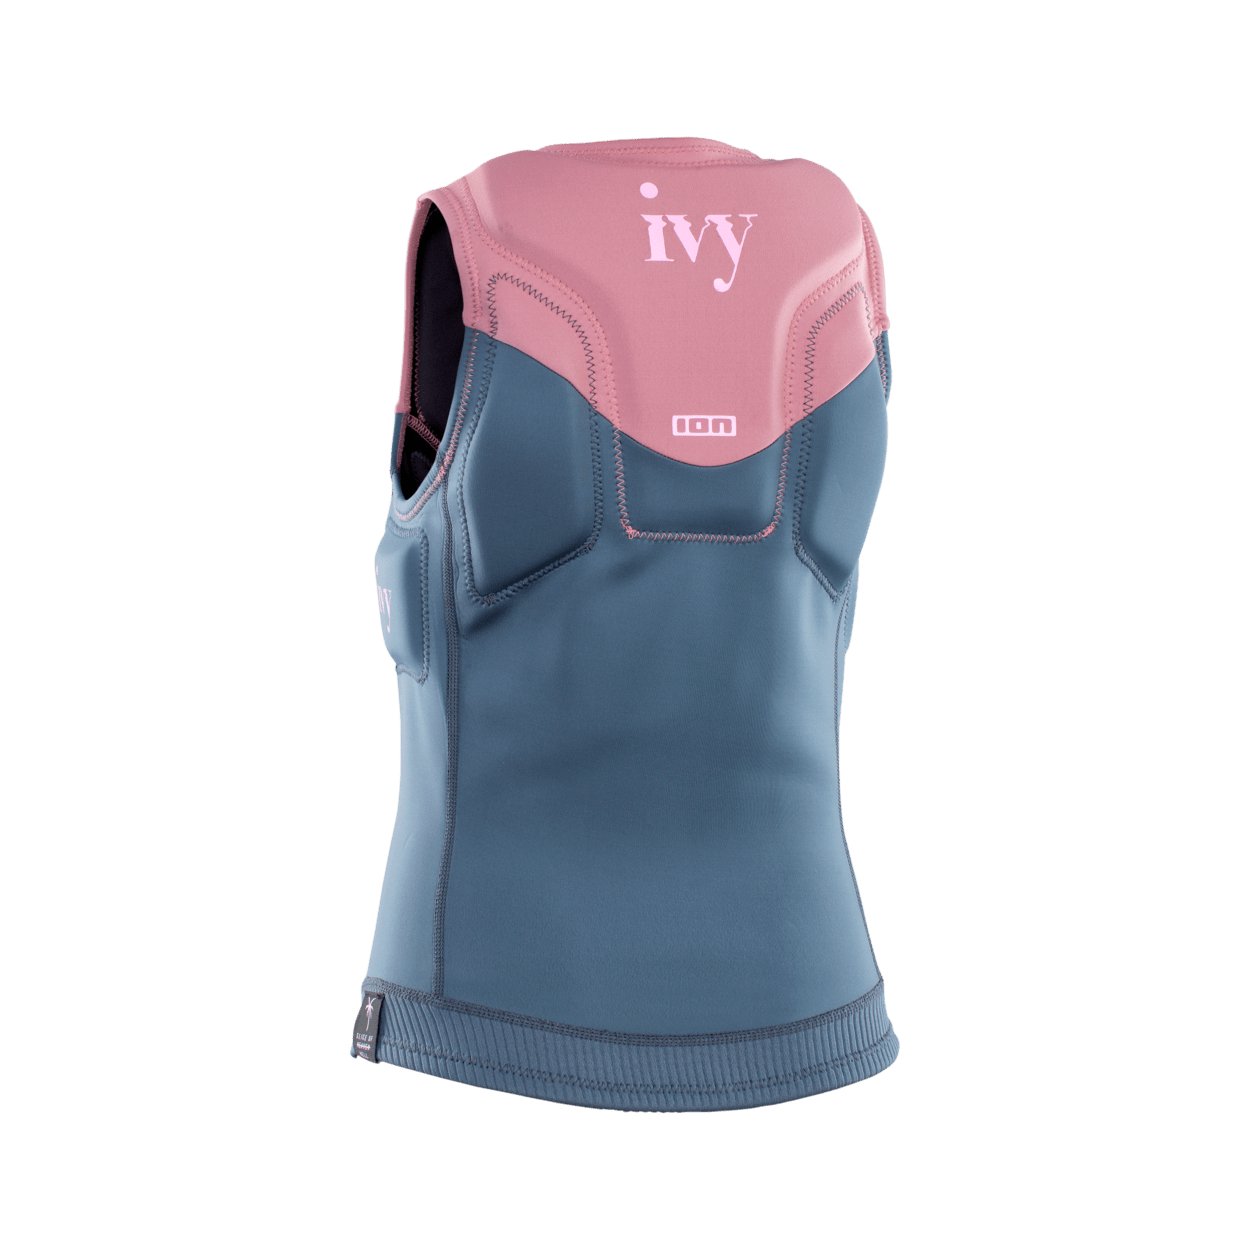 ION Ivy Vest Front Zip 2023 - Worthing Watersports - 9010583051949 - Protection - ION Water